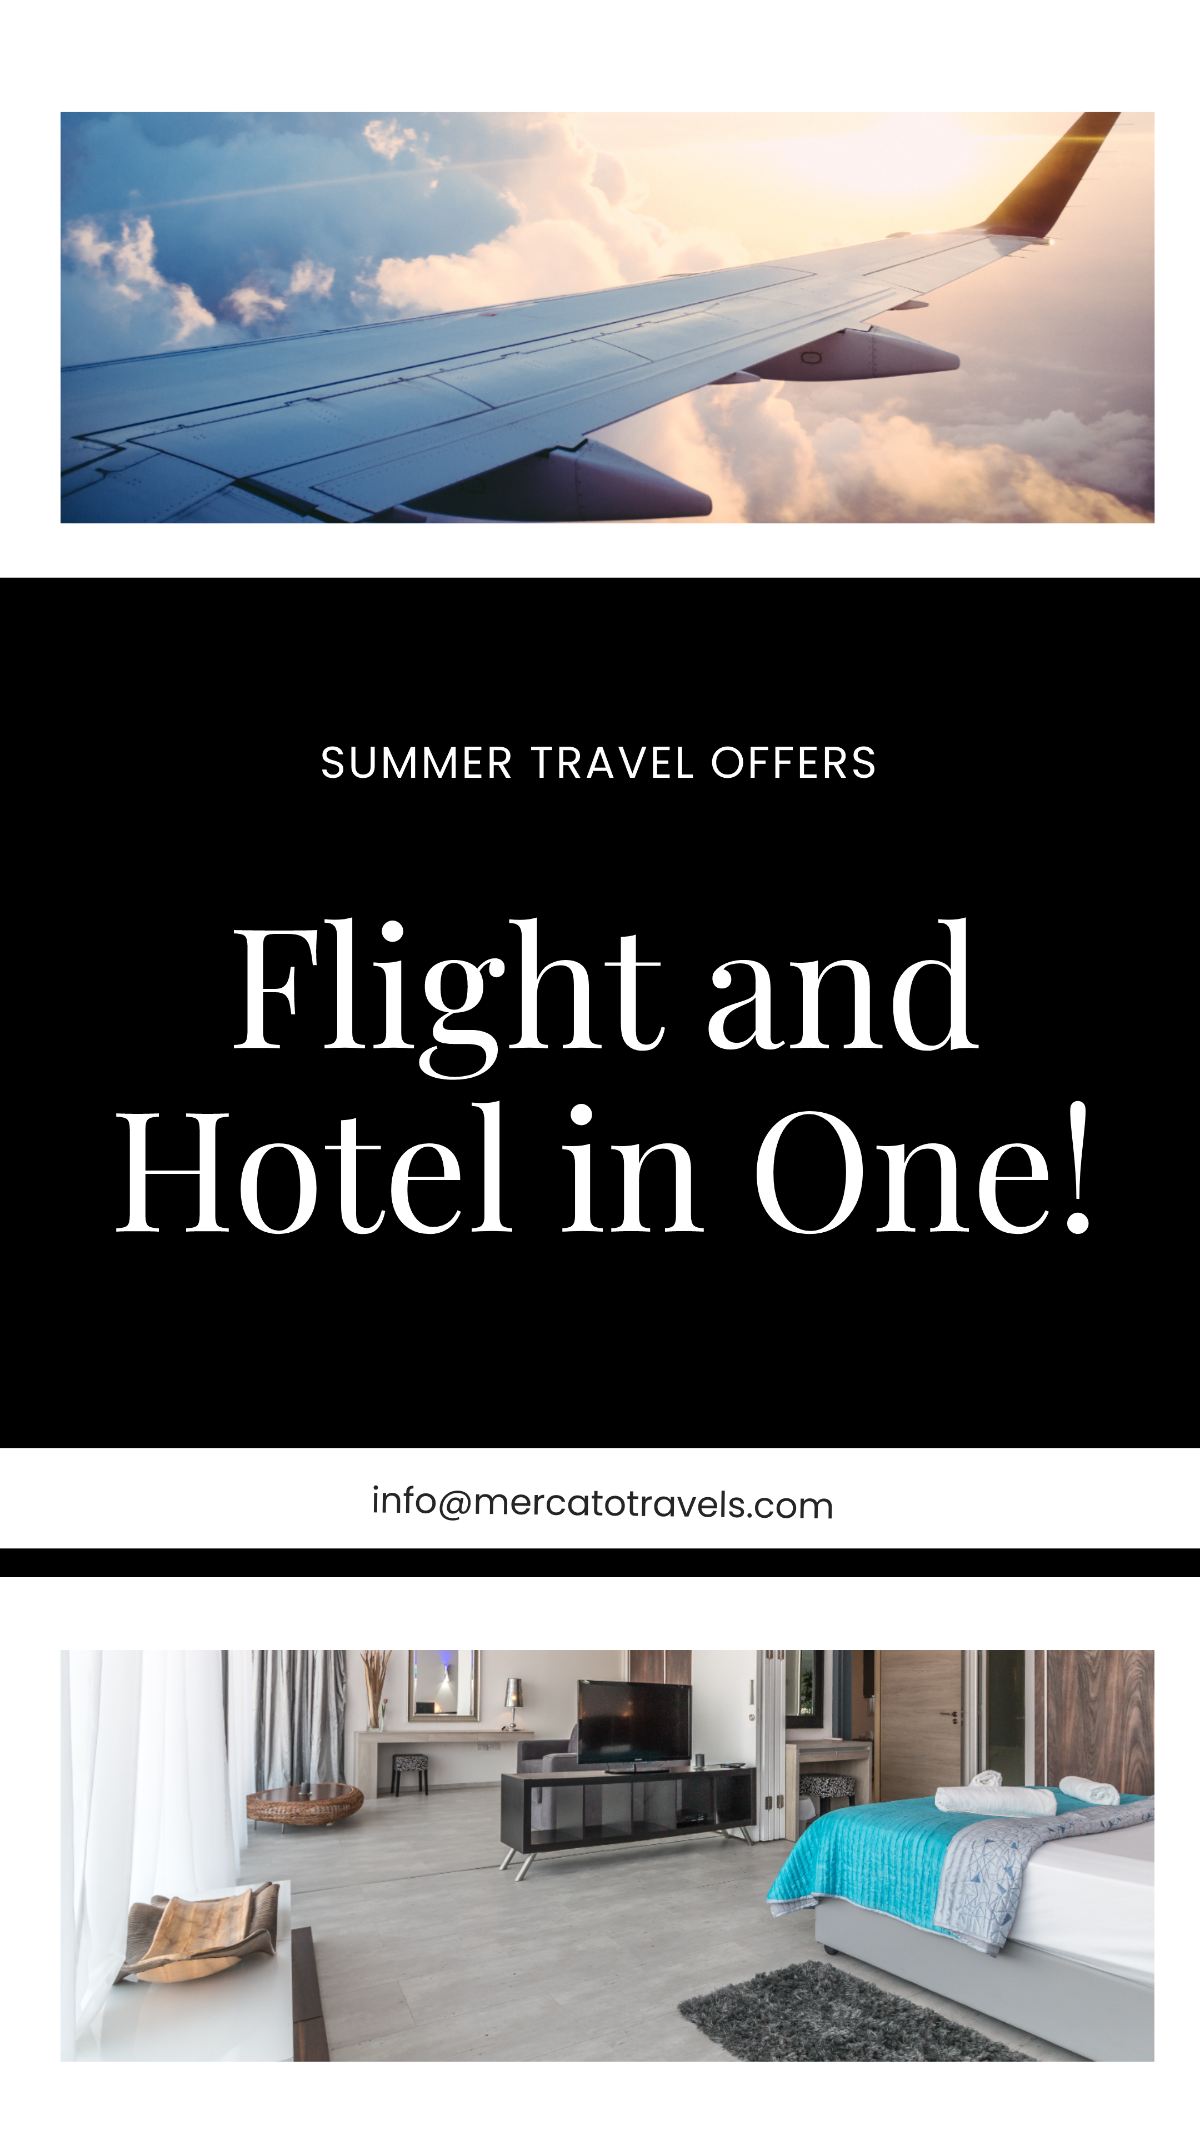 Free Travel Offer Whatsapp Image Post Template